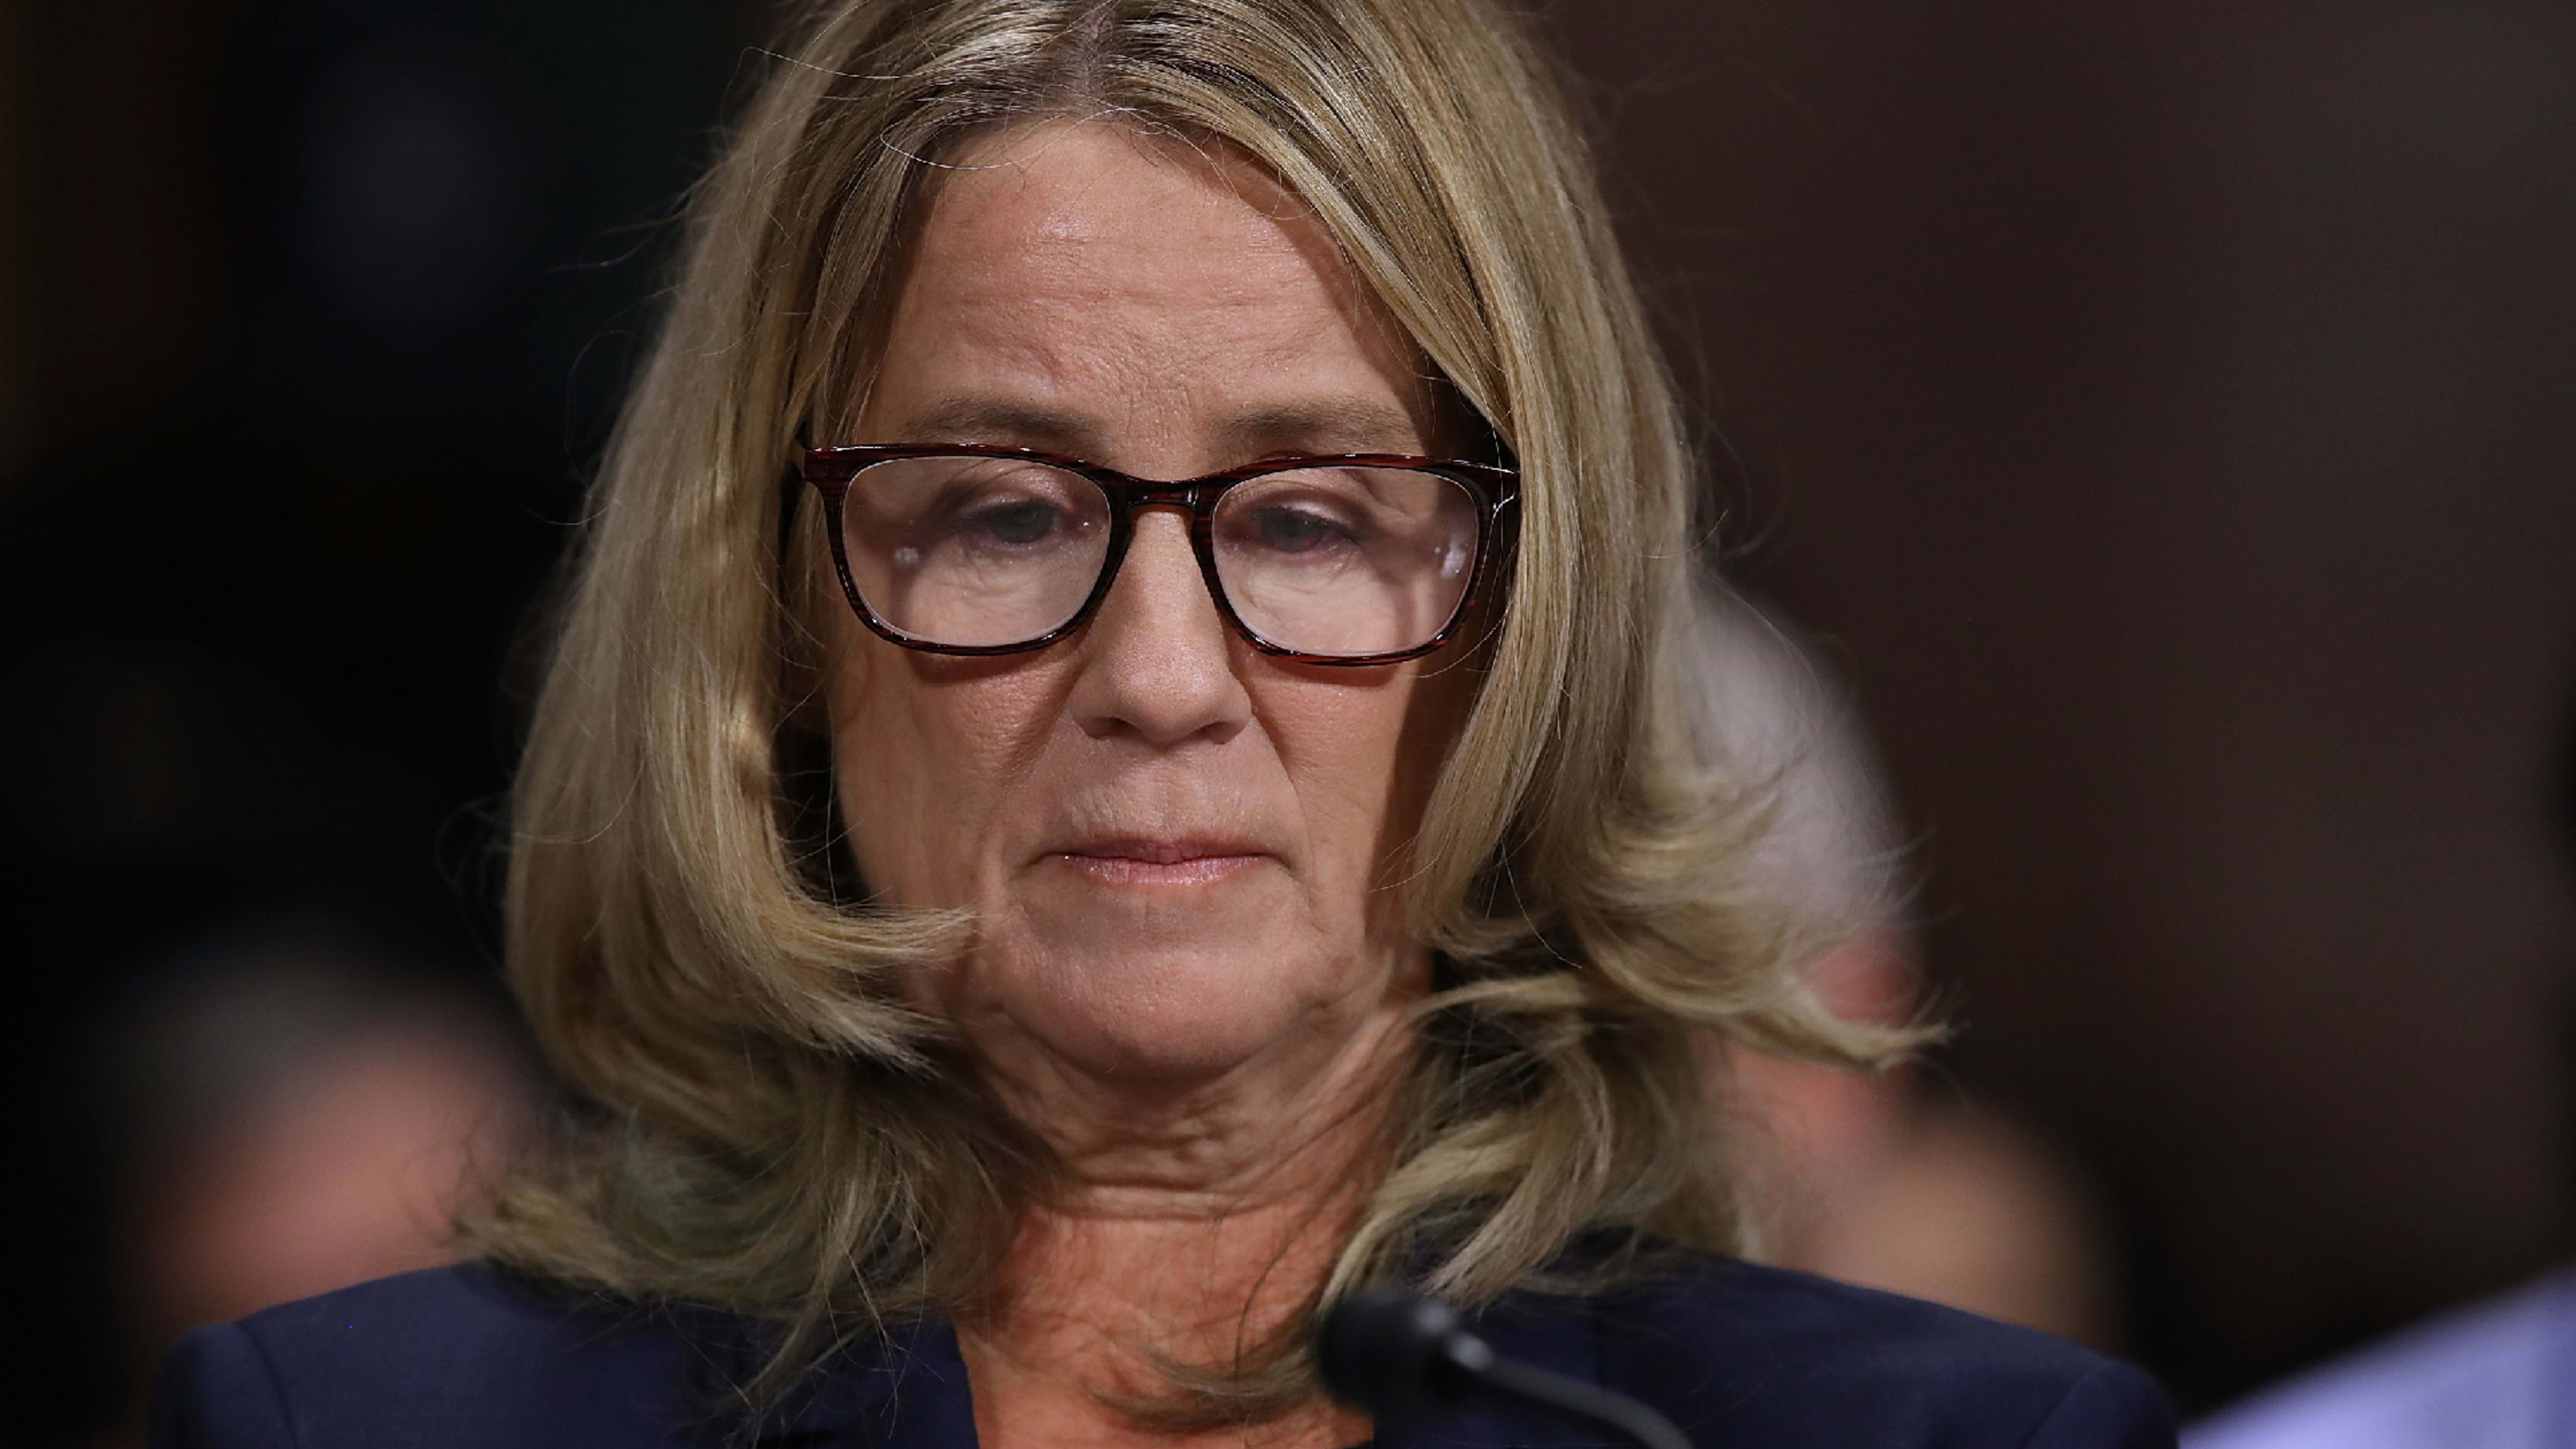 Christine Blasey Ford has had to move four times, but sure, let’s protect Tucker Carlson